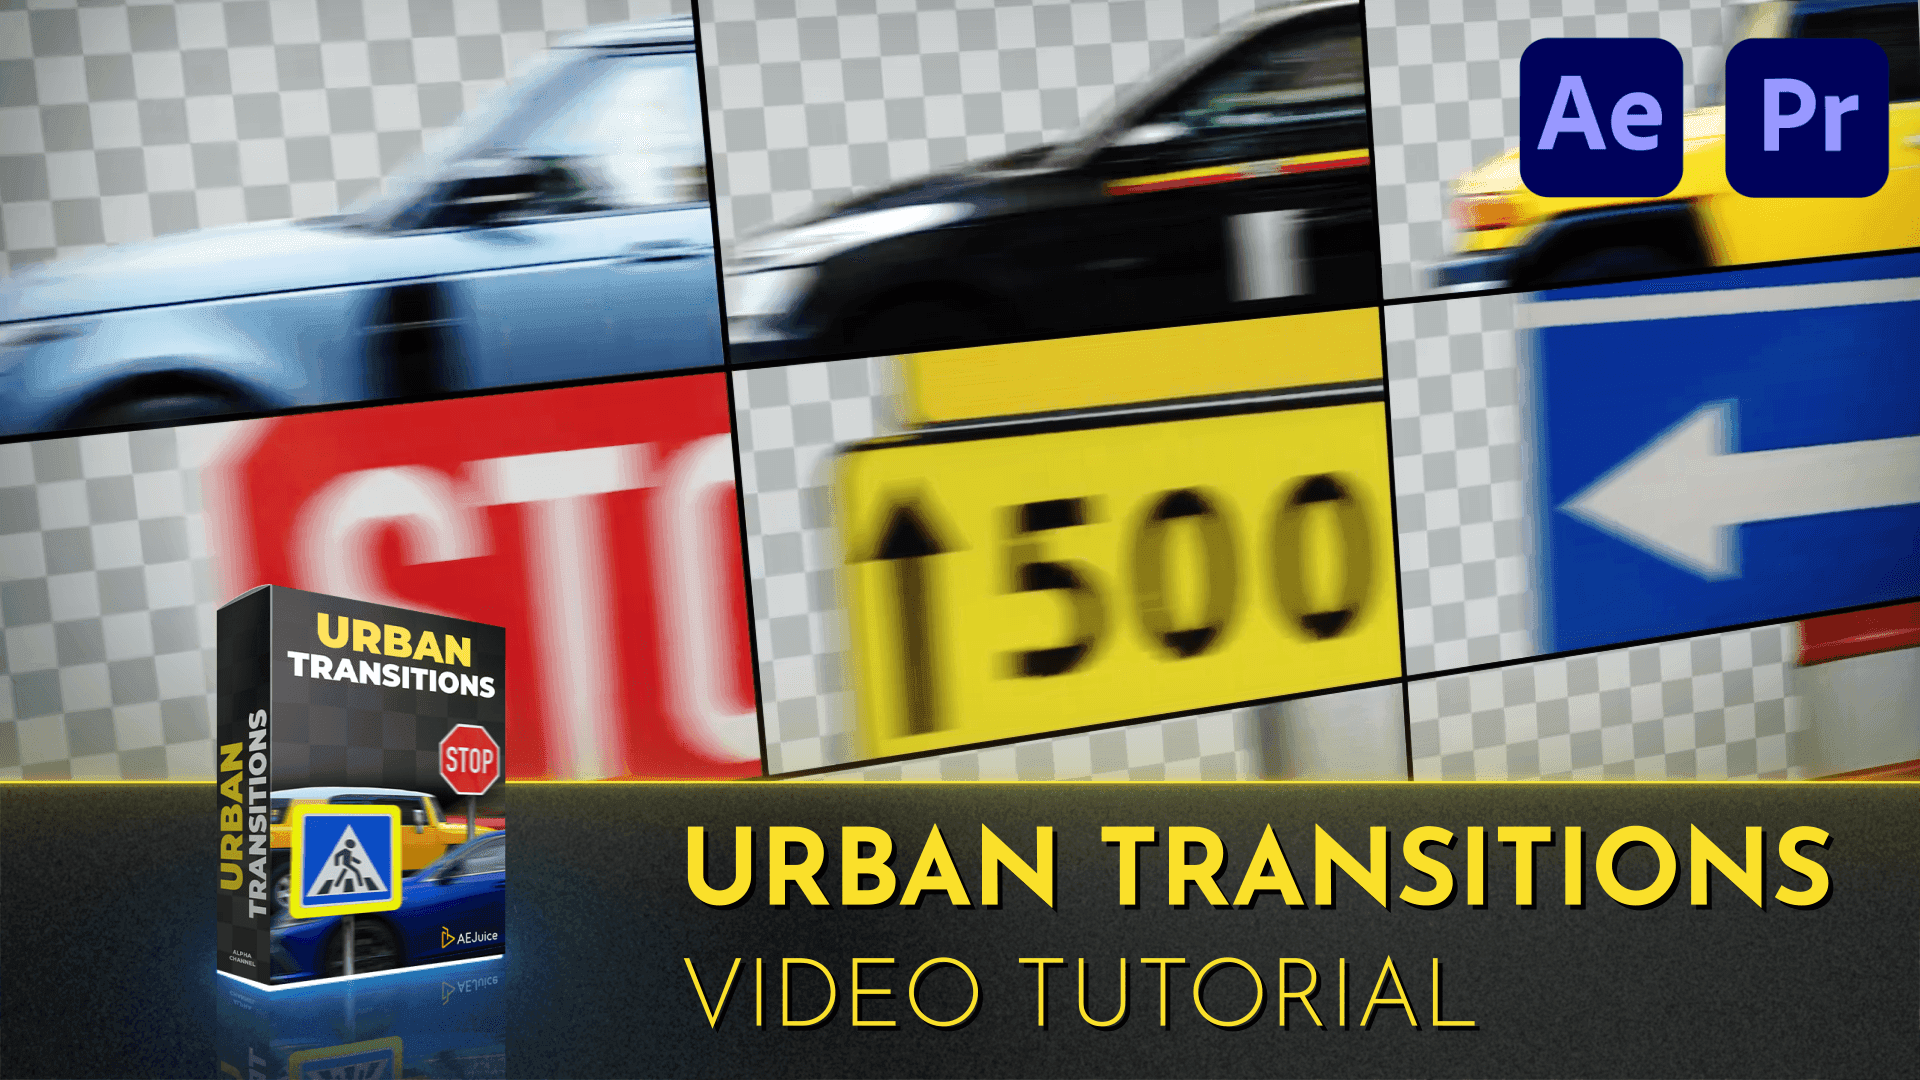 Urban Transitions | Video Tutorial | After Effects | Premiere Pro